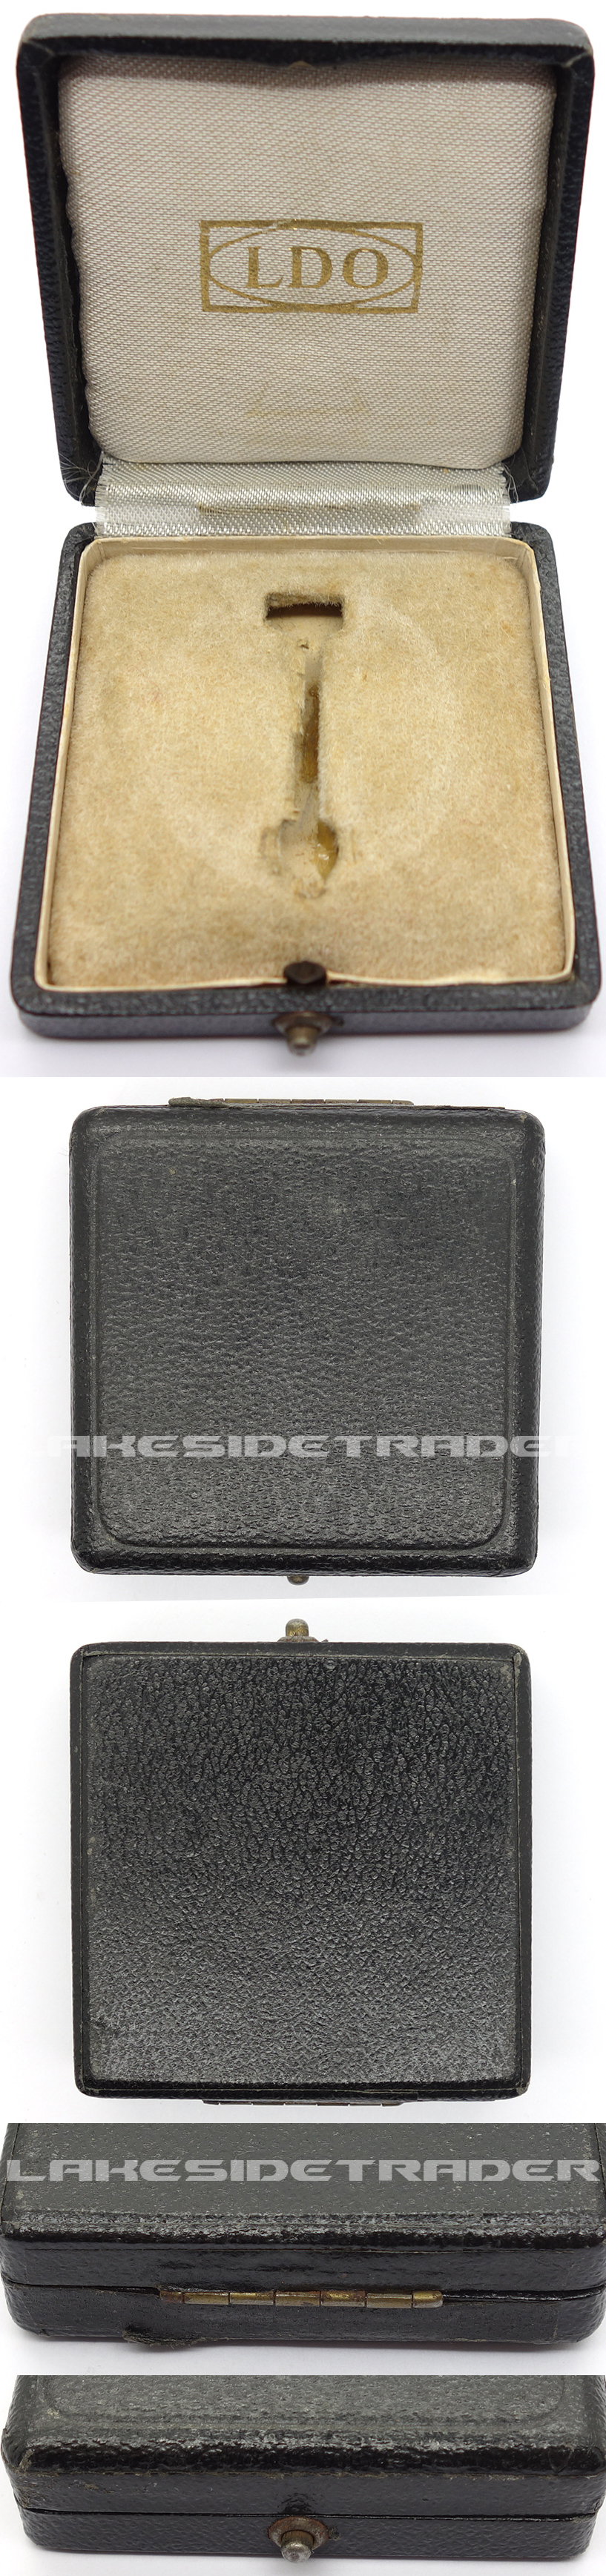 LDO Issue Case for a Gold Wound Badge